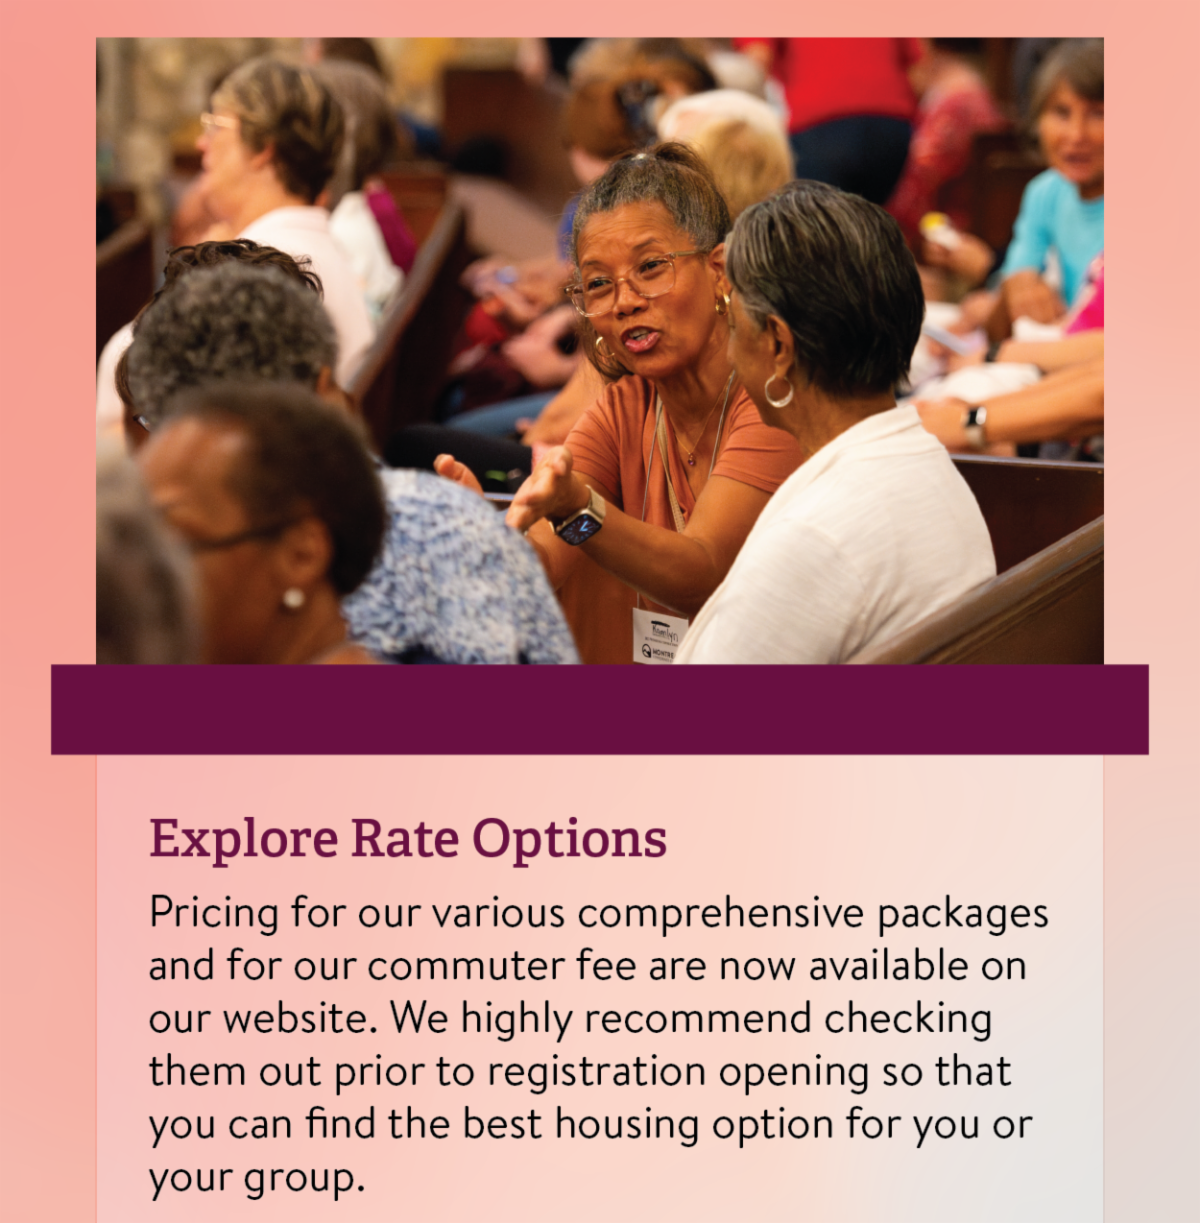 Explore Rate Options - Pricing for our various comprehensive packages and for our commuter fee are now available on our website. We highly recommend checking them out prior to registration opening so that you can find the best housing option for you or your group.